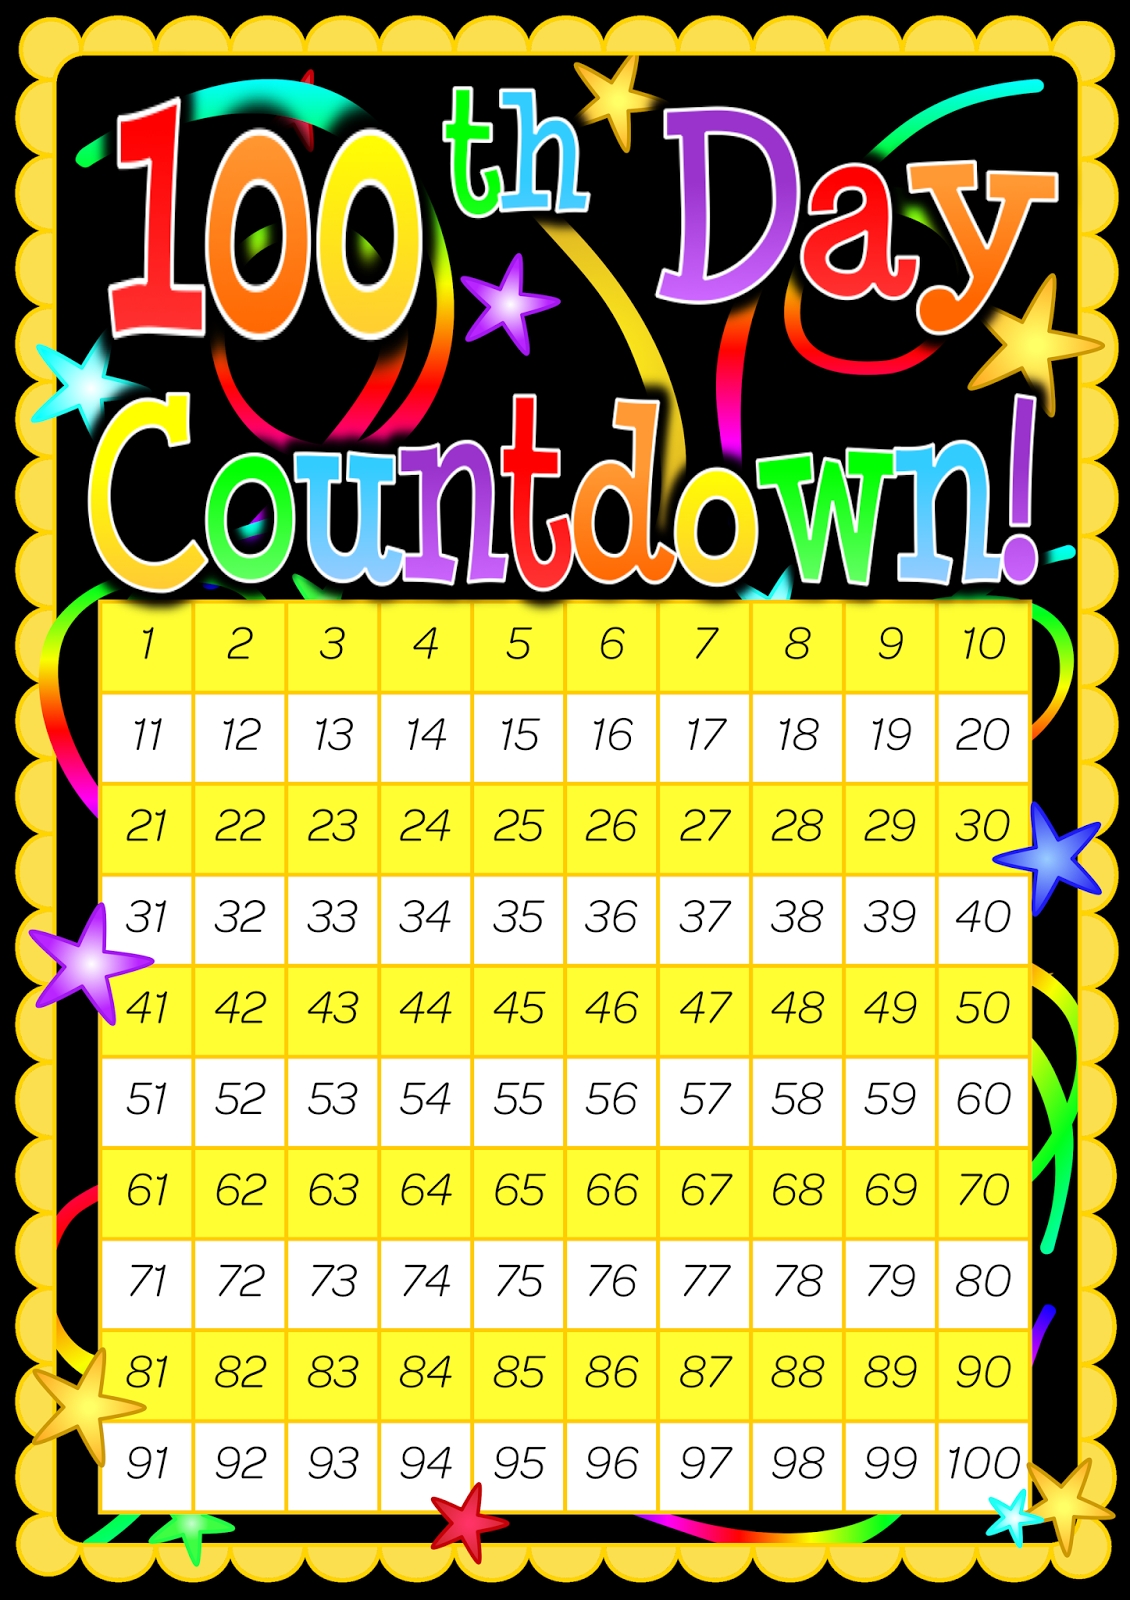 100 day countdown poster included is a 200 day countdown